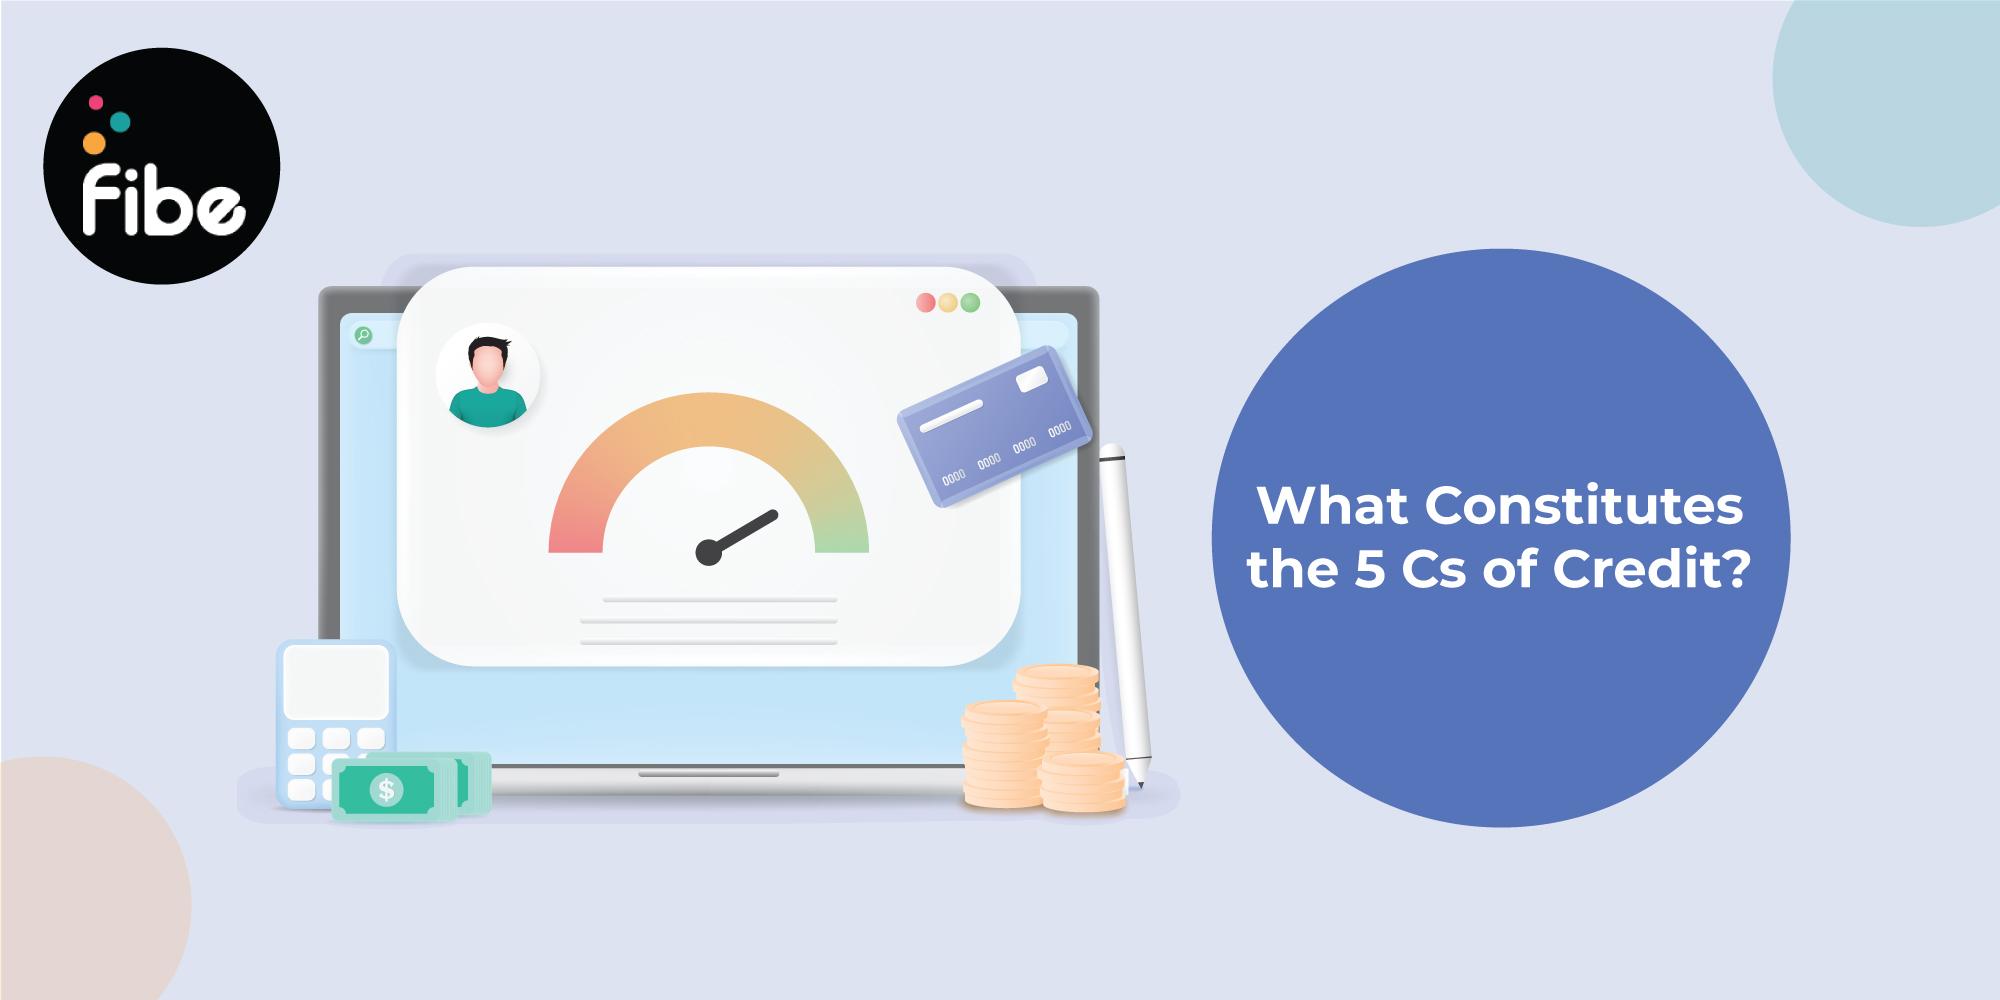 5Cs of Credit: What do they Mean and why are They Important?